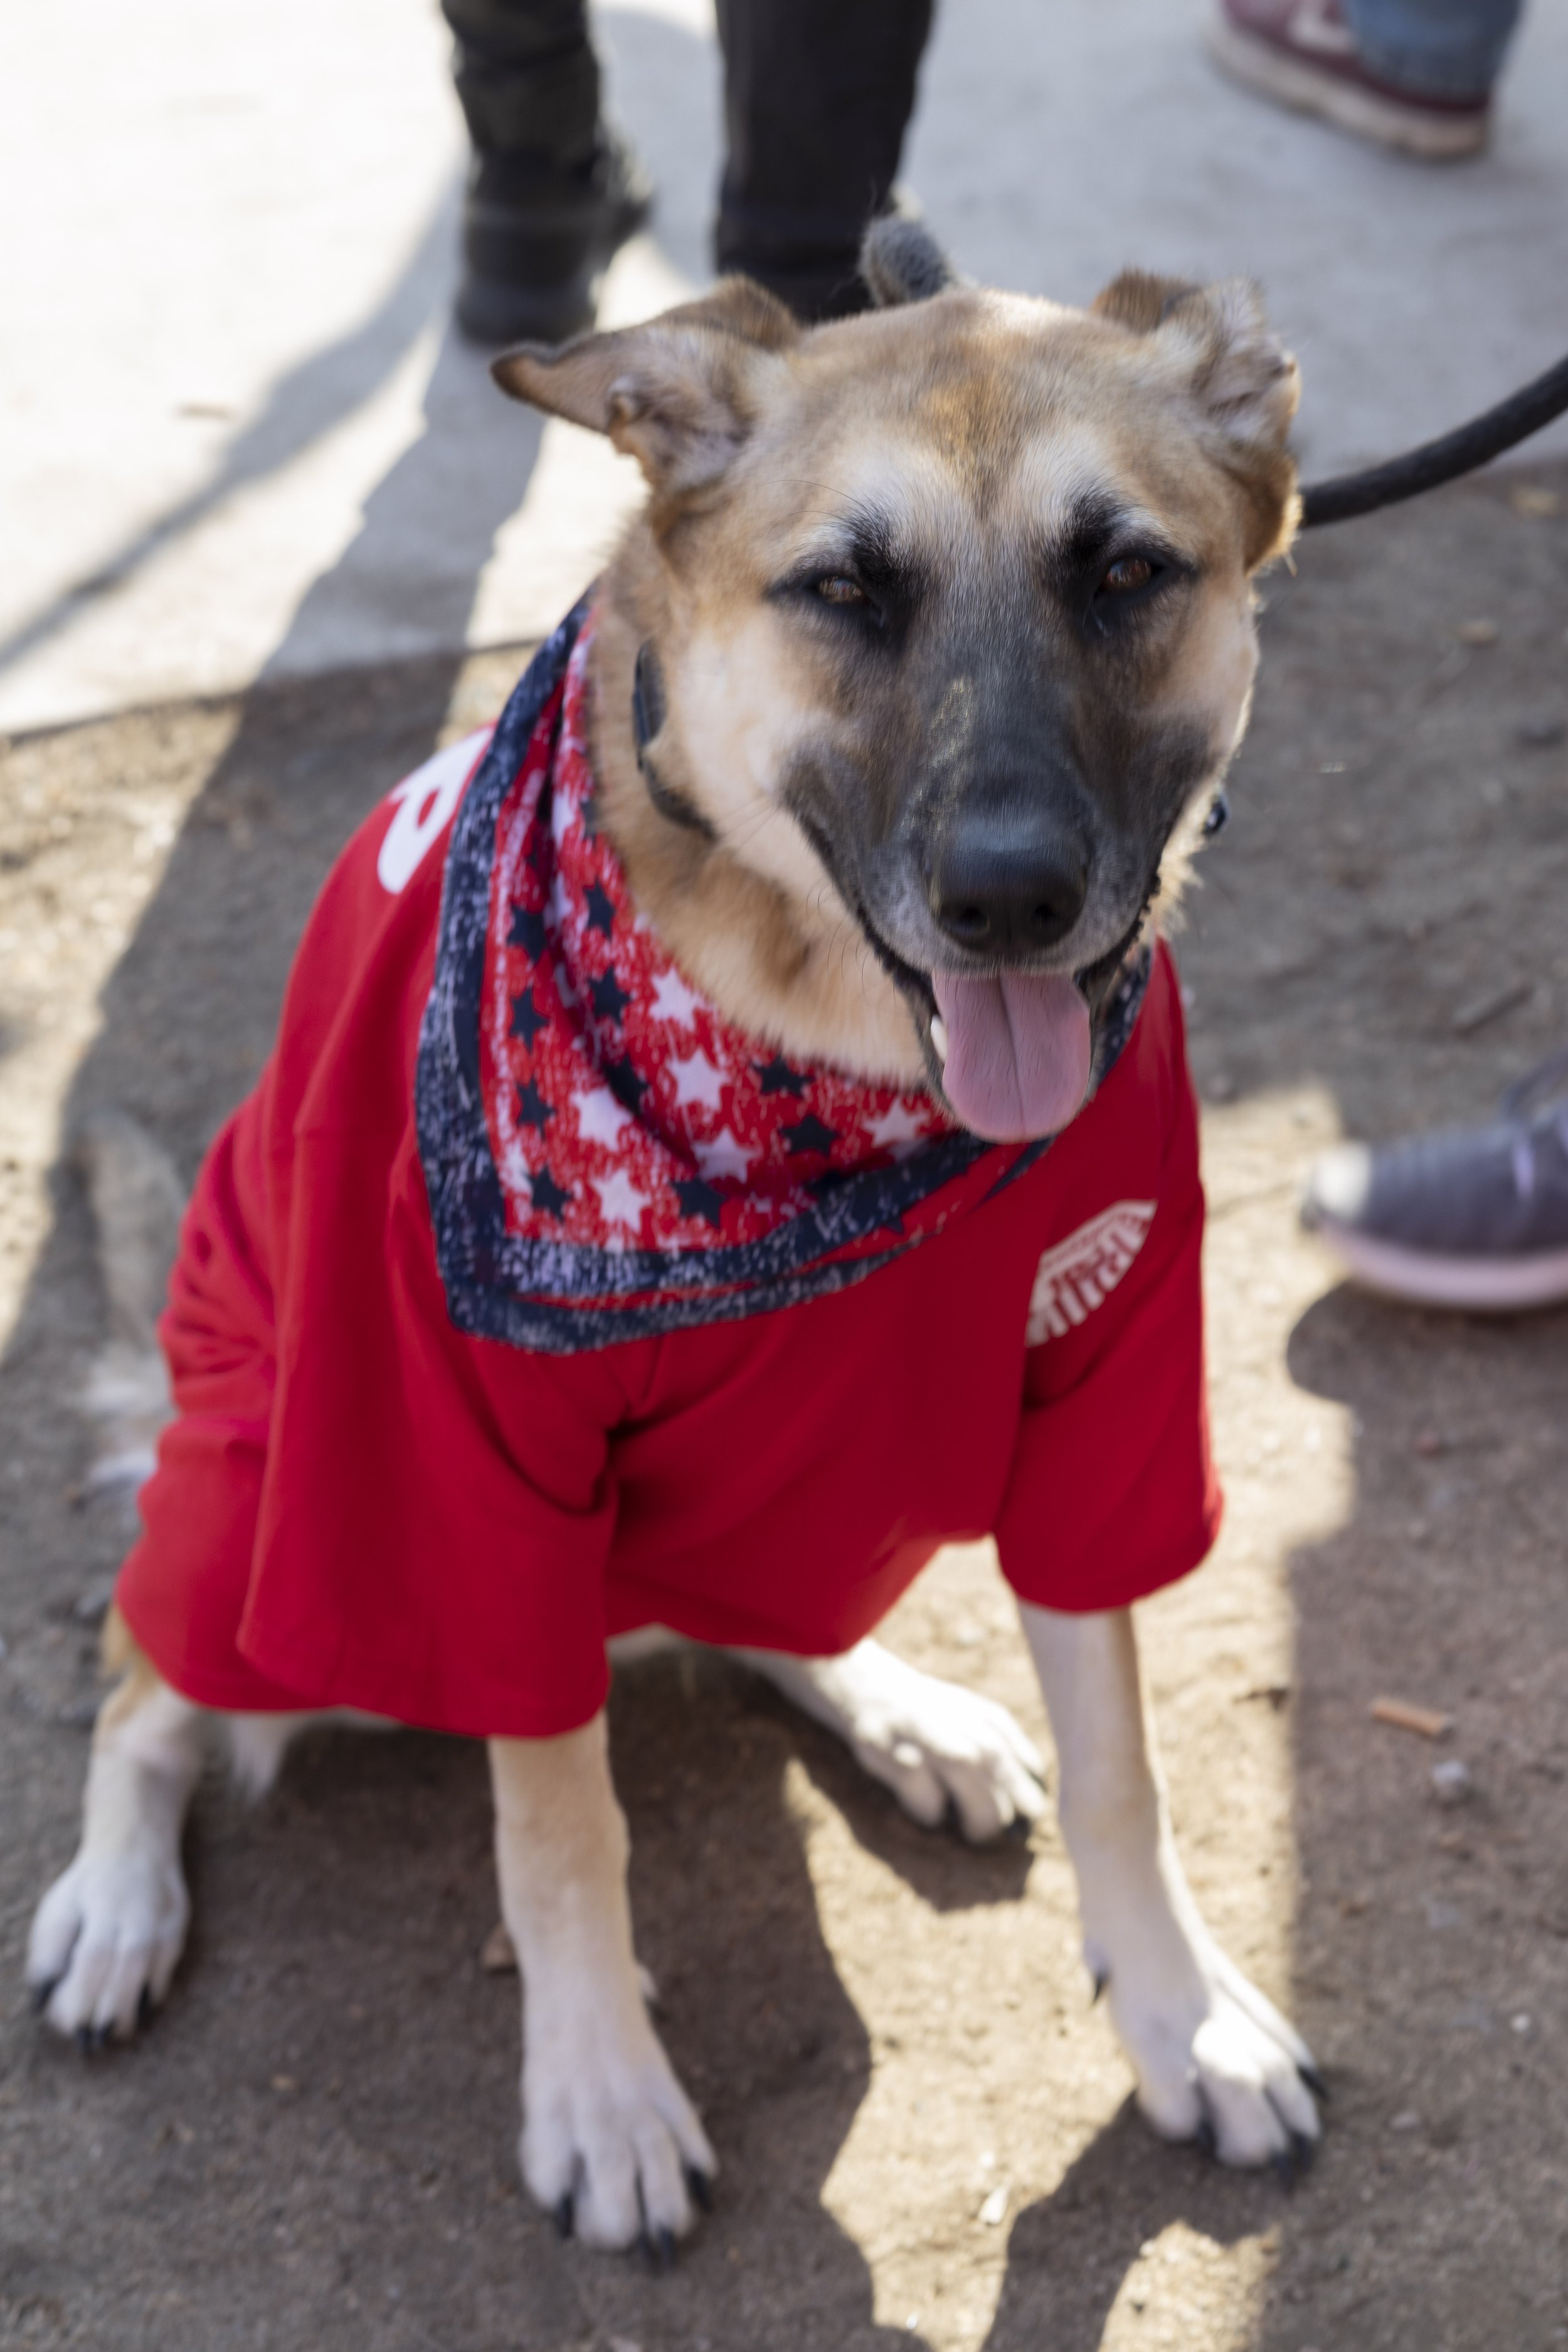  Haley the dog wearing her red shirt for the EMS march for fair wages in downtown Los Angeles. Haley wasn't the only dog marching for fair wages, many of the EMS workers joining in the march brought their four-legged friends as well. East Los Angeles